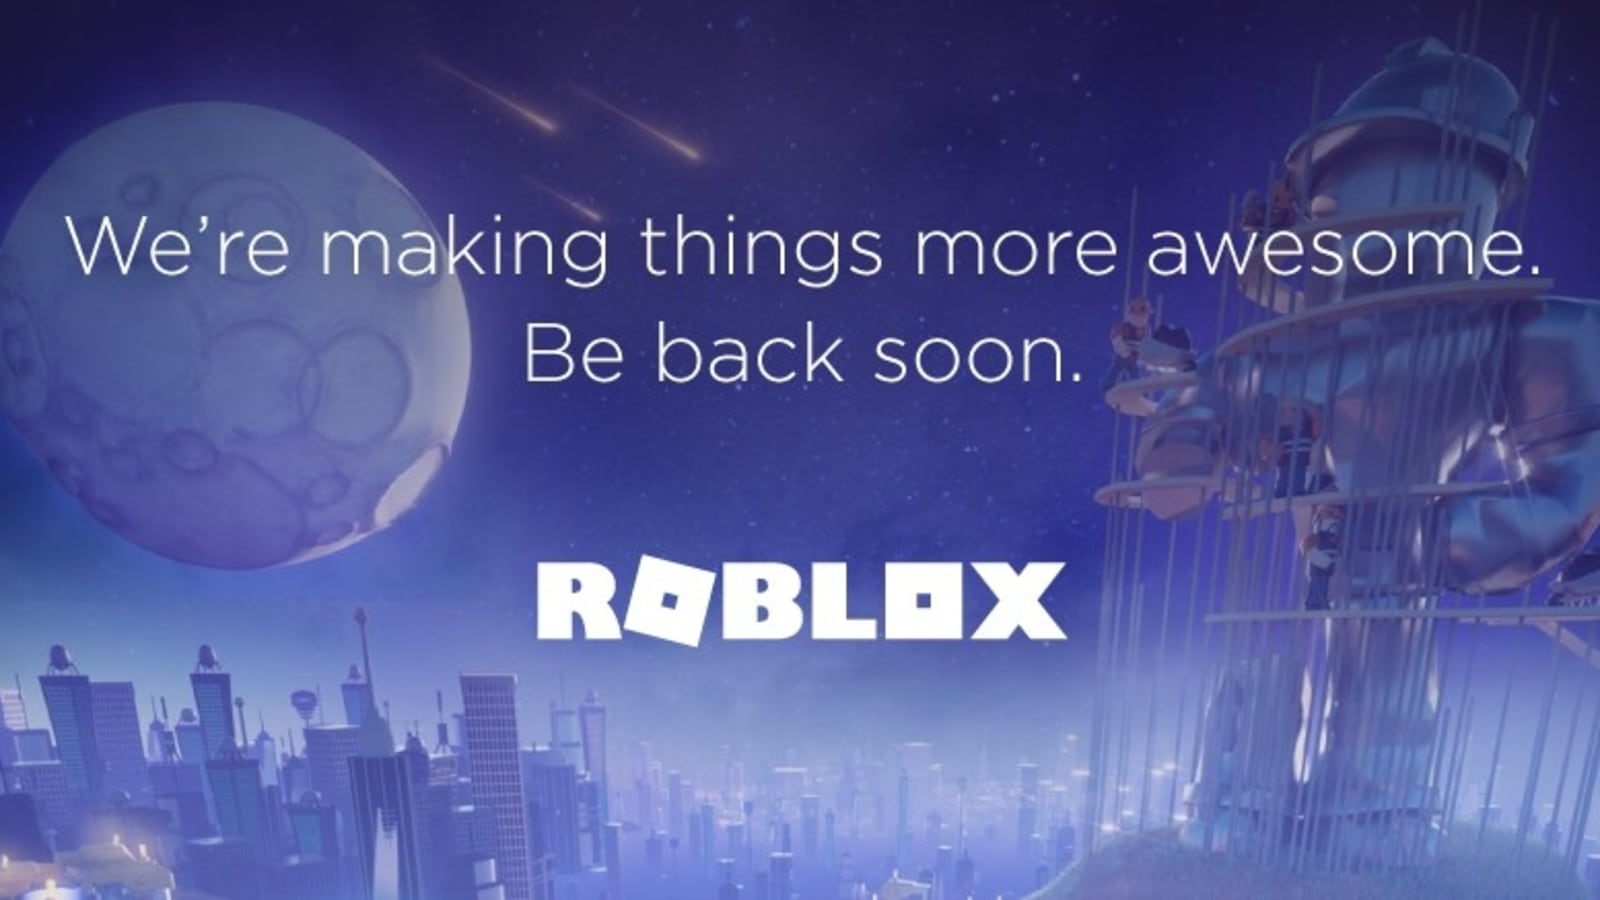 THIS PROMO CODE GIVES FREE ROBUX! (30,000 ROBUX) May 2021 